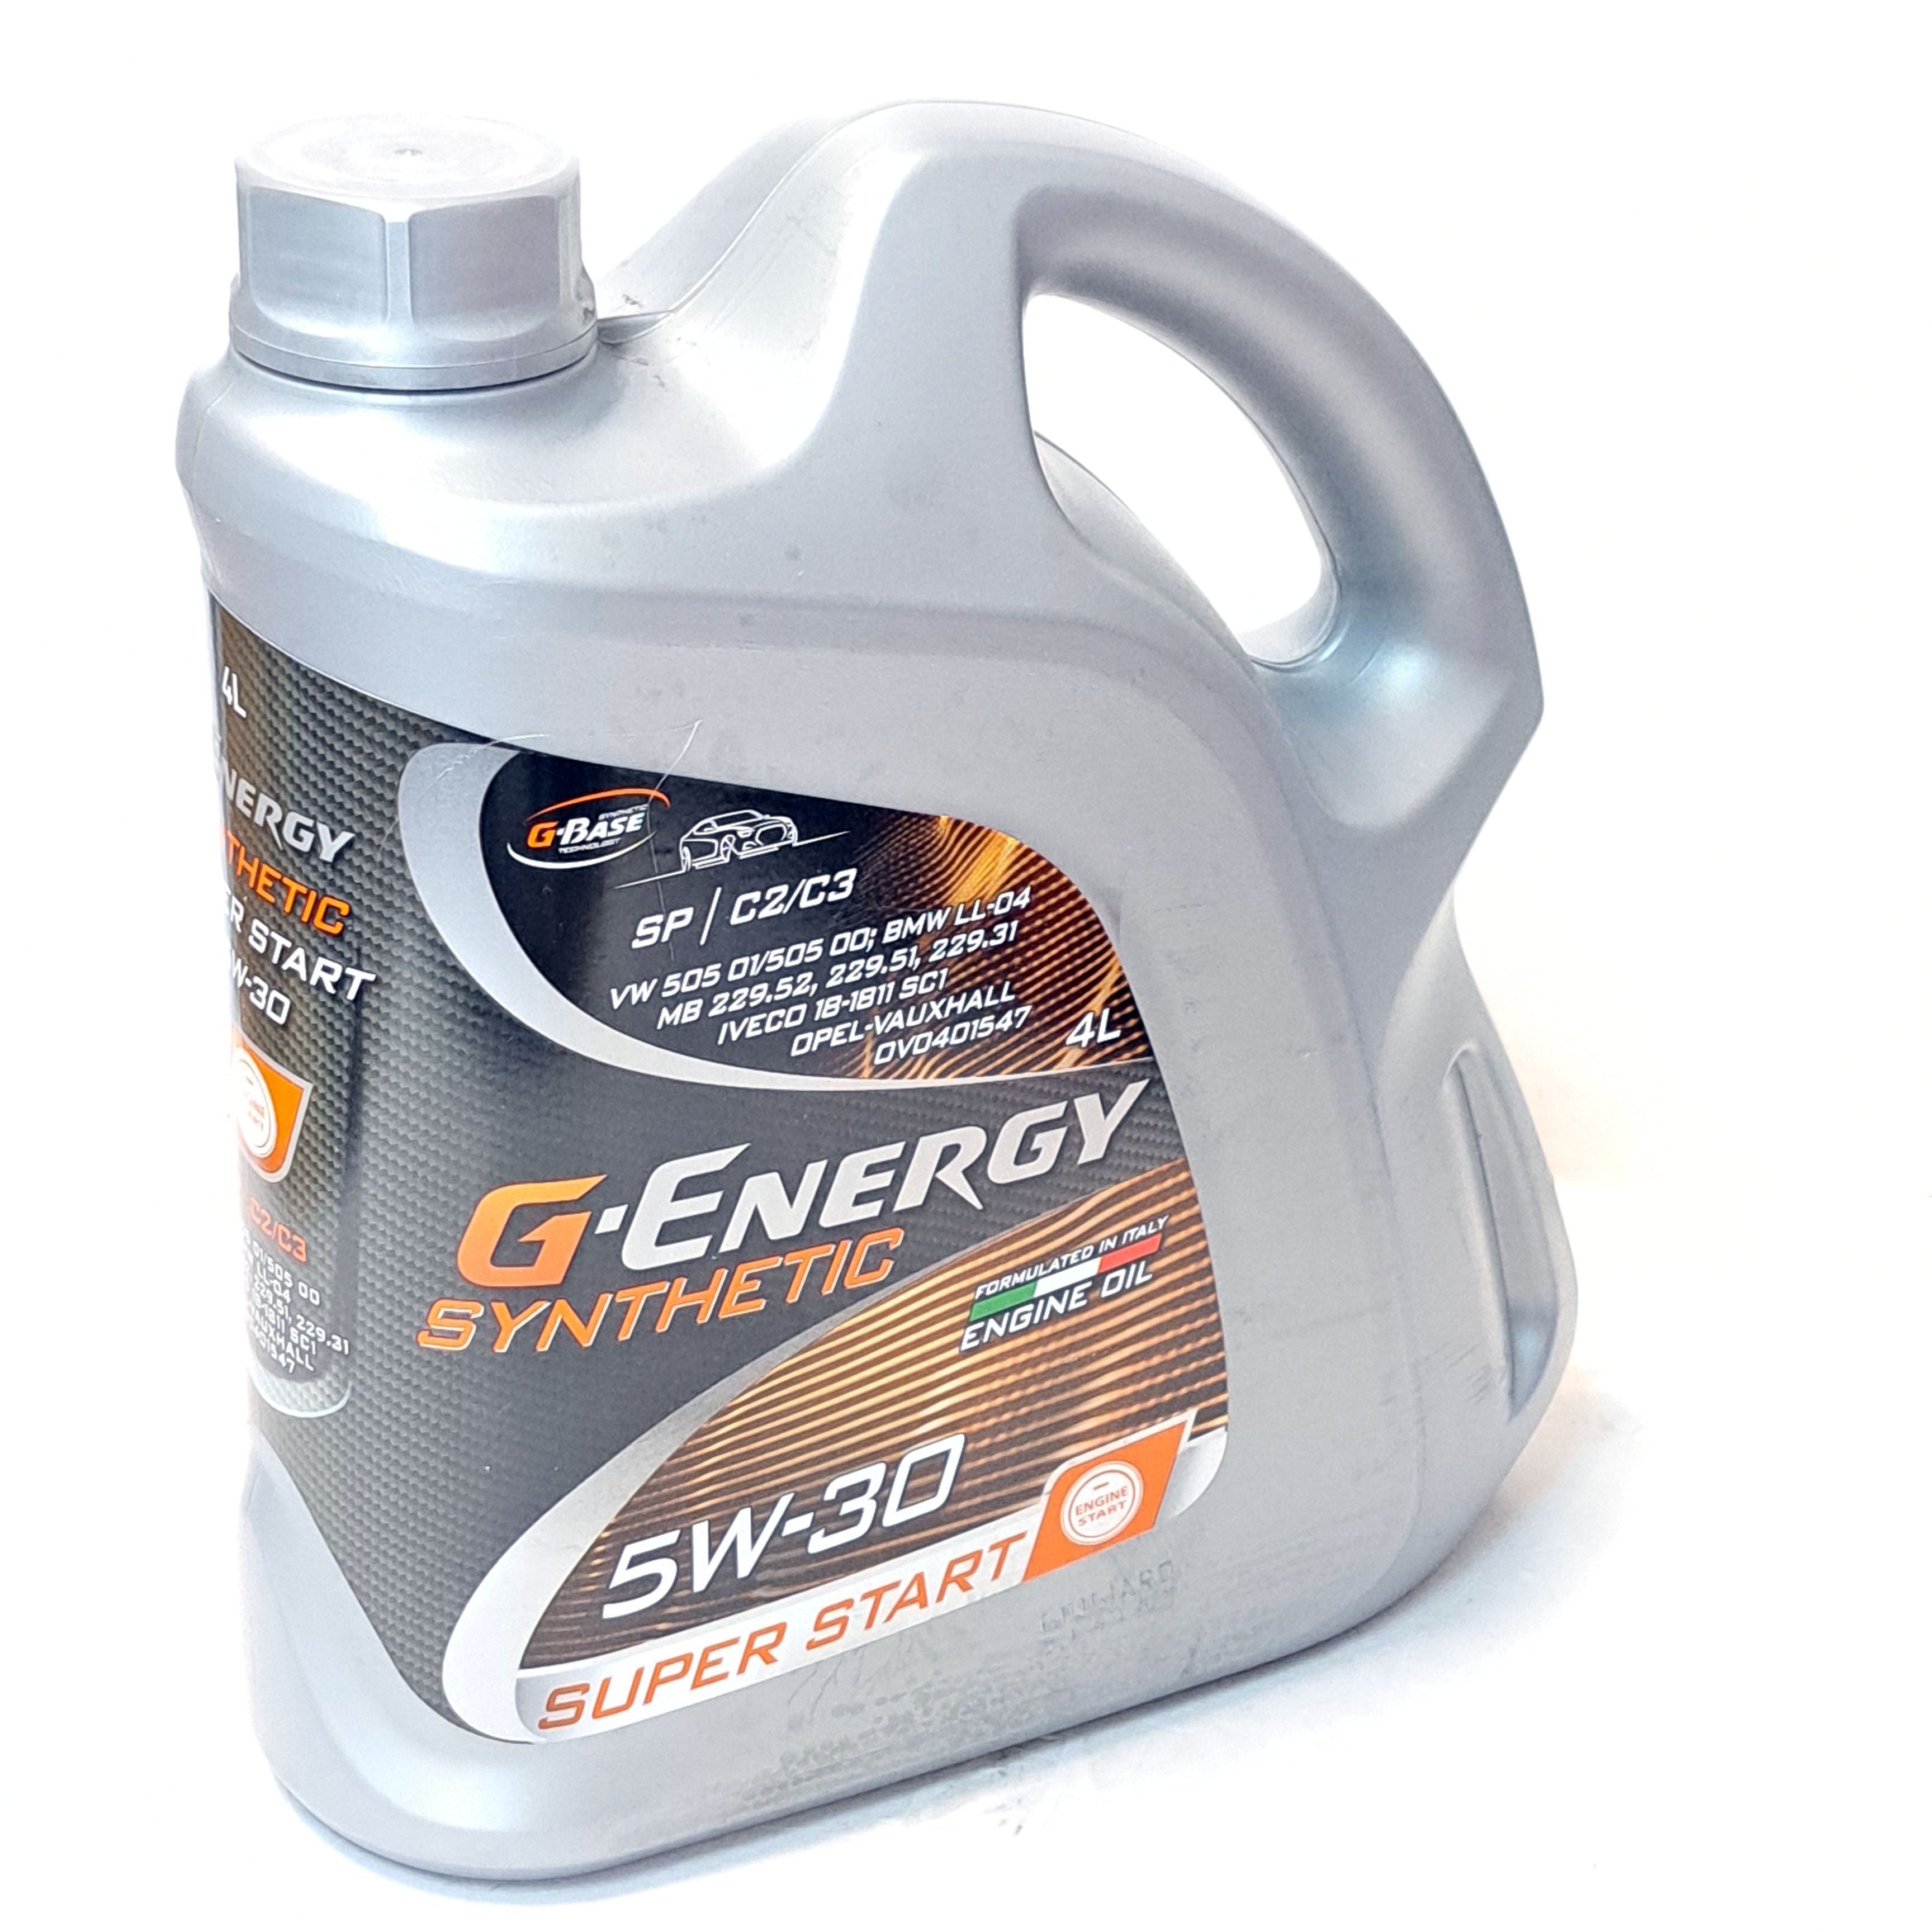 Super start 5w30. G-Energy Synthetic super start 5w-30. 253142400 Артикул Synthetic super start 5w-3 синтетика 5w-30 4 л.. G-Energy Synthetic Active 5w-30.